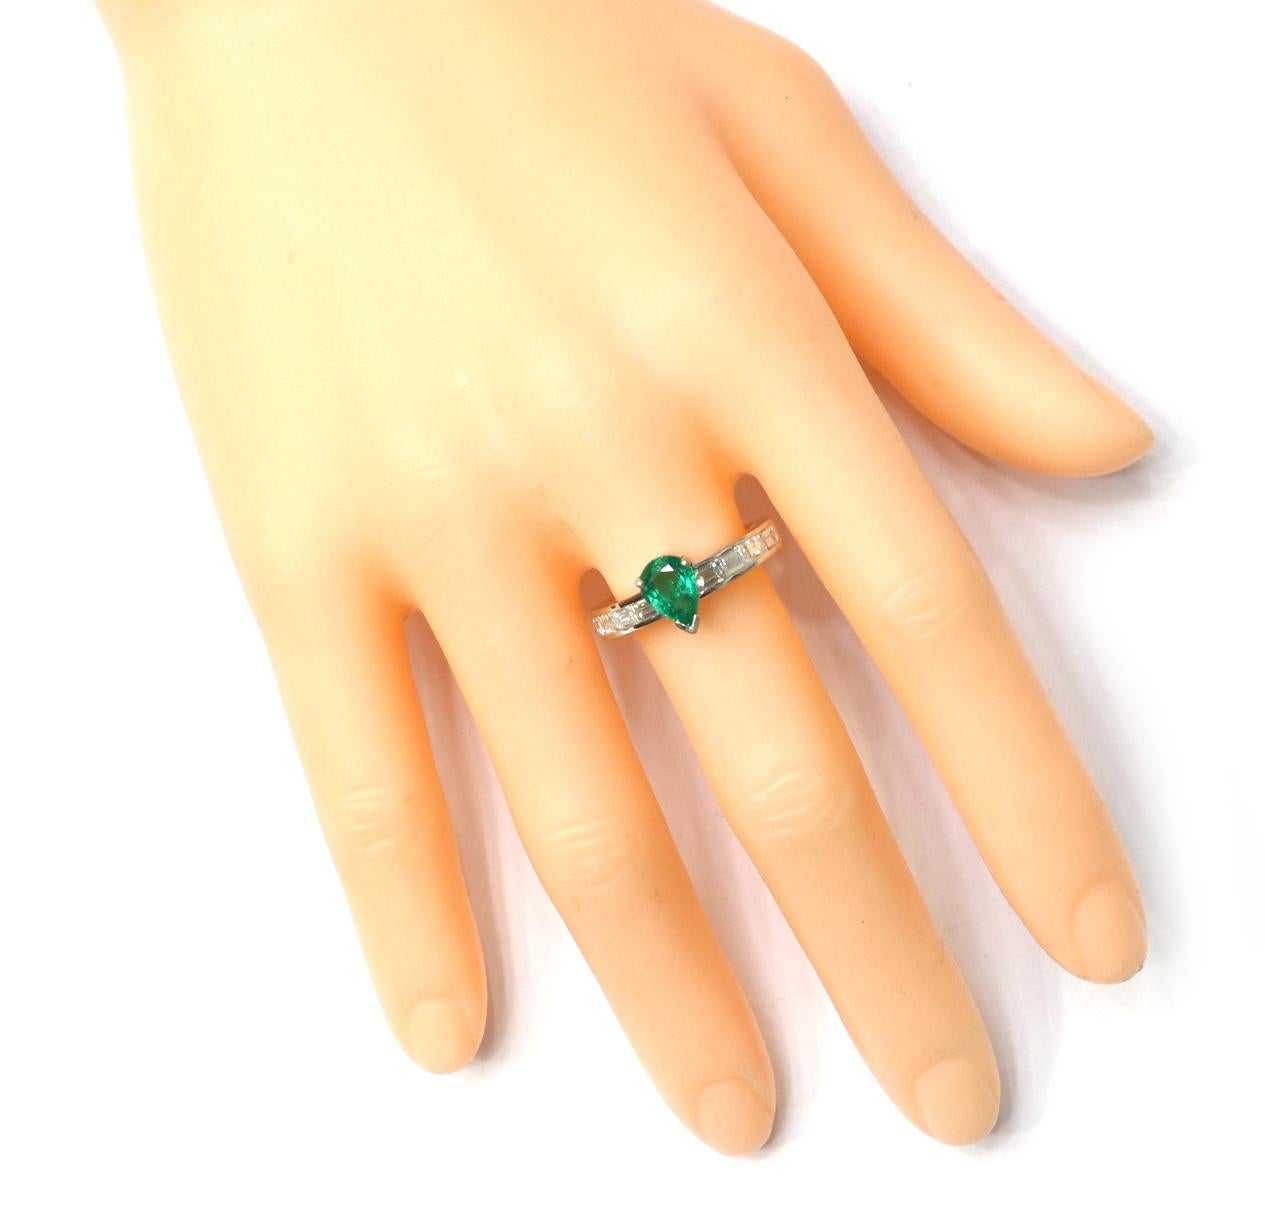 18 Karat White Gold 2.19 Carat Natural Emerald and Diamond Solitaire Band Ring

A true testament to the power of simplicity, this striking ring is an ideal choice. Expertly crafted, the scene-stealing Pear-Shape Emerald is encrusted in the center